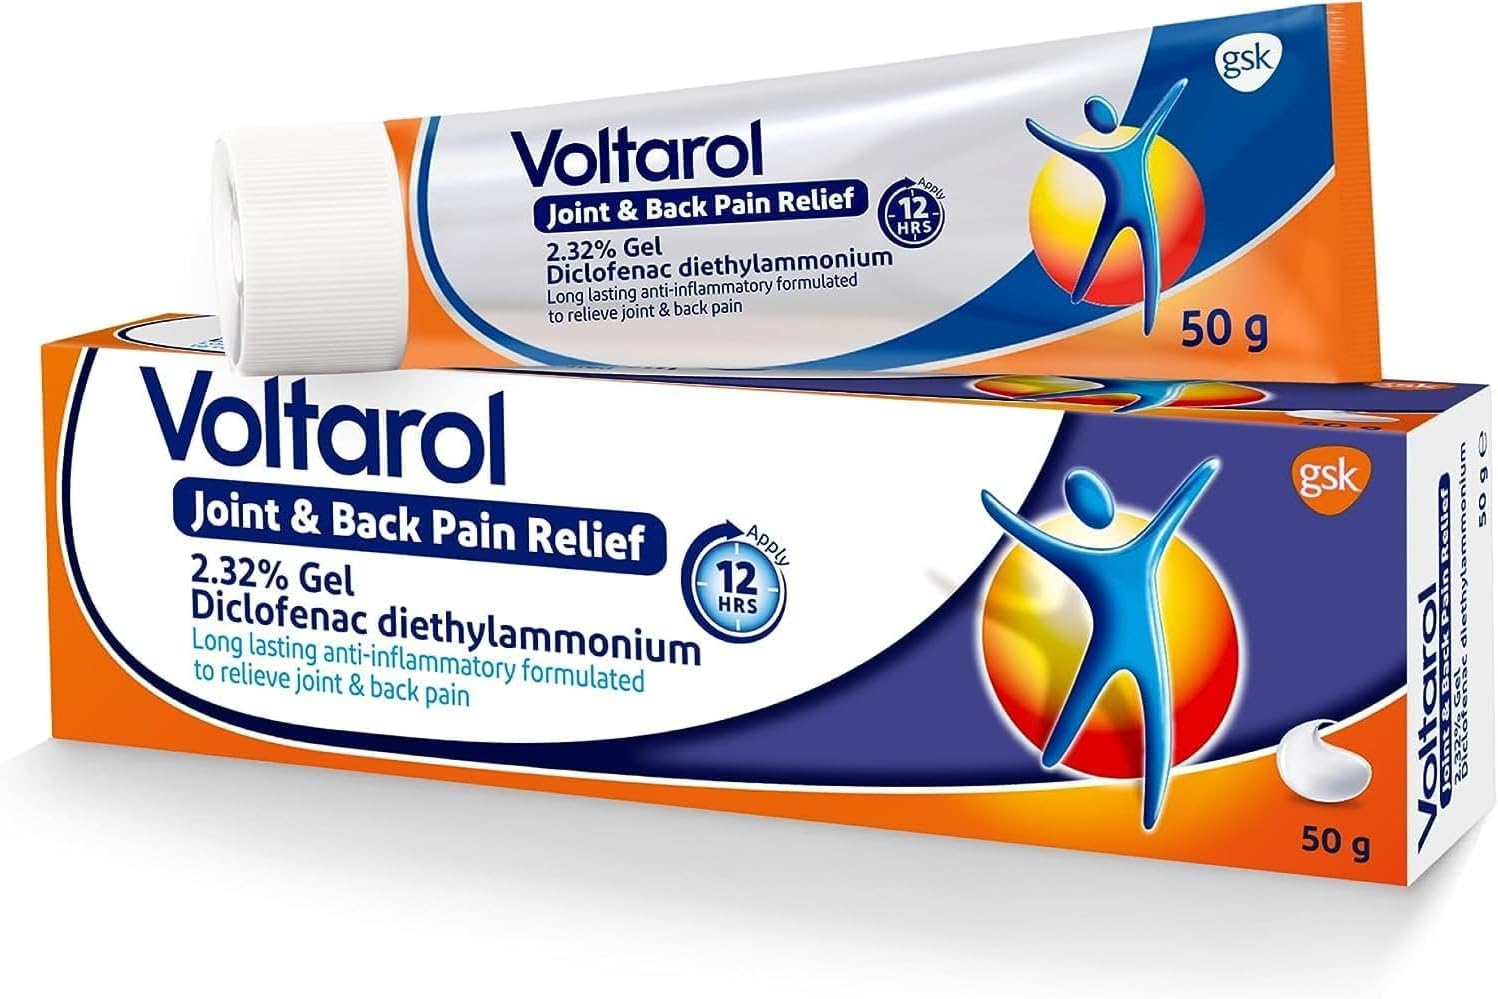 voltarol-pain-relief-gel-12-hour-joint-pain-relief-232-gel-packaging-may-vary-50-g-pack-of-1